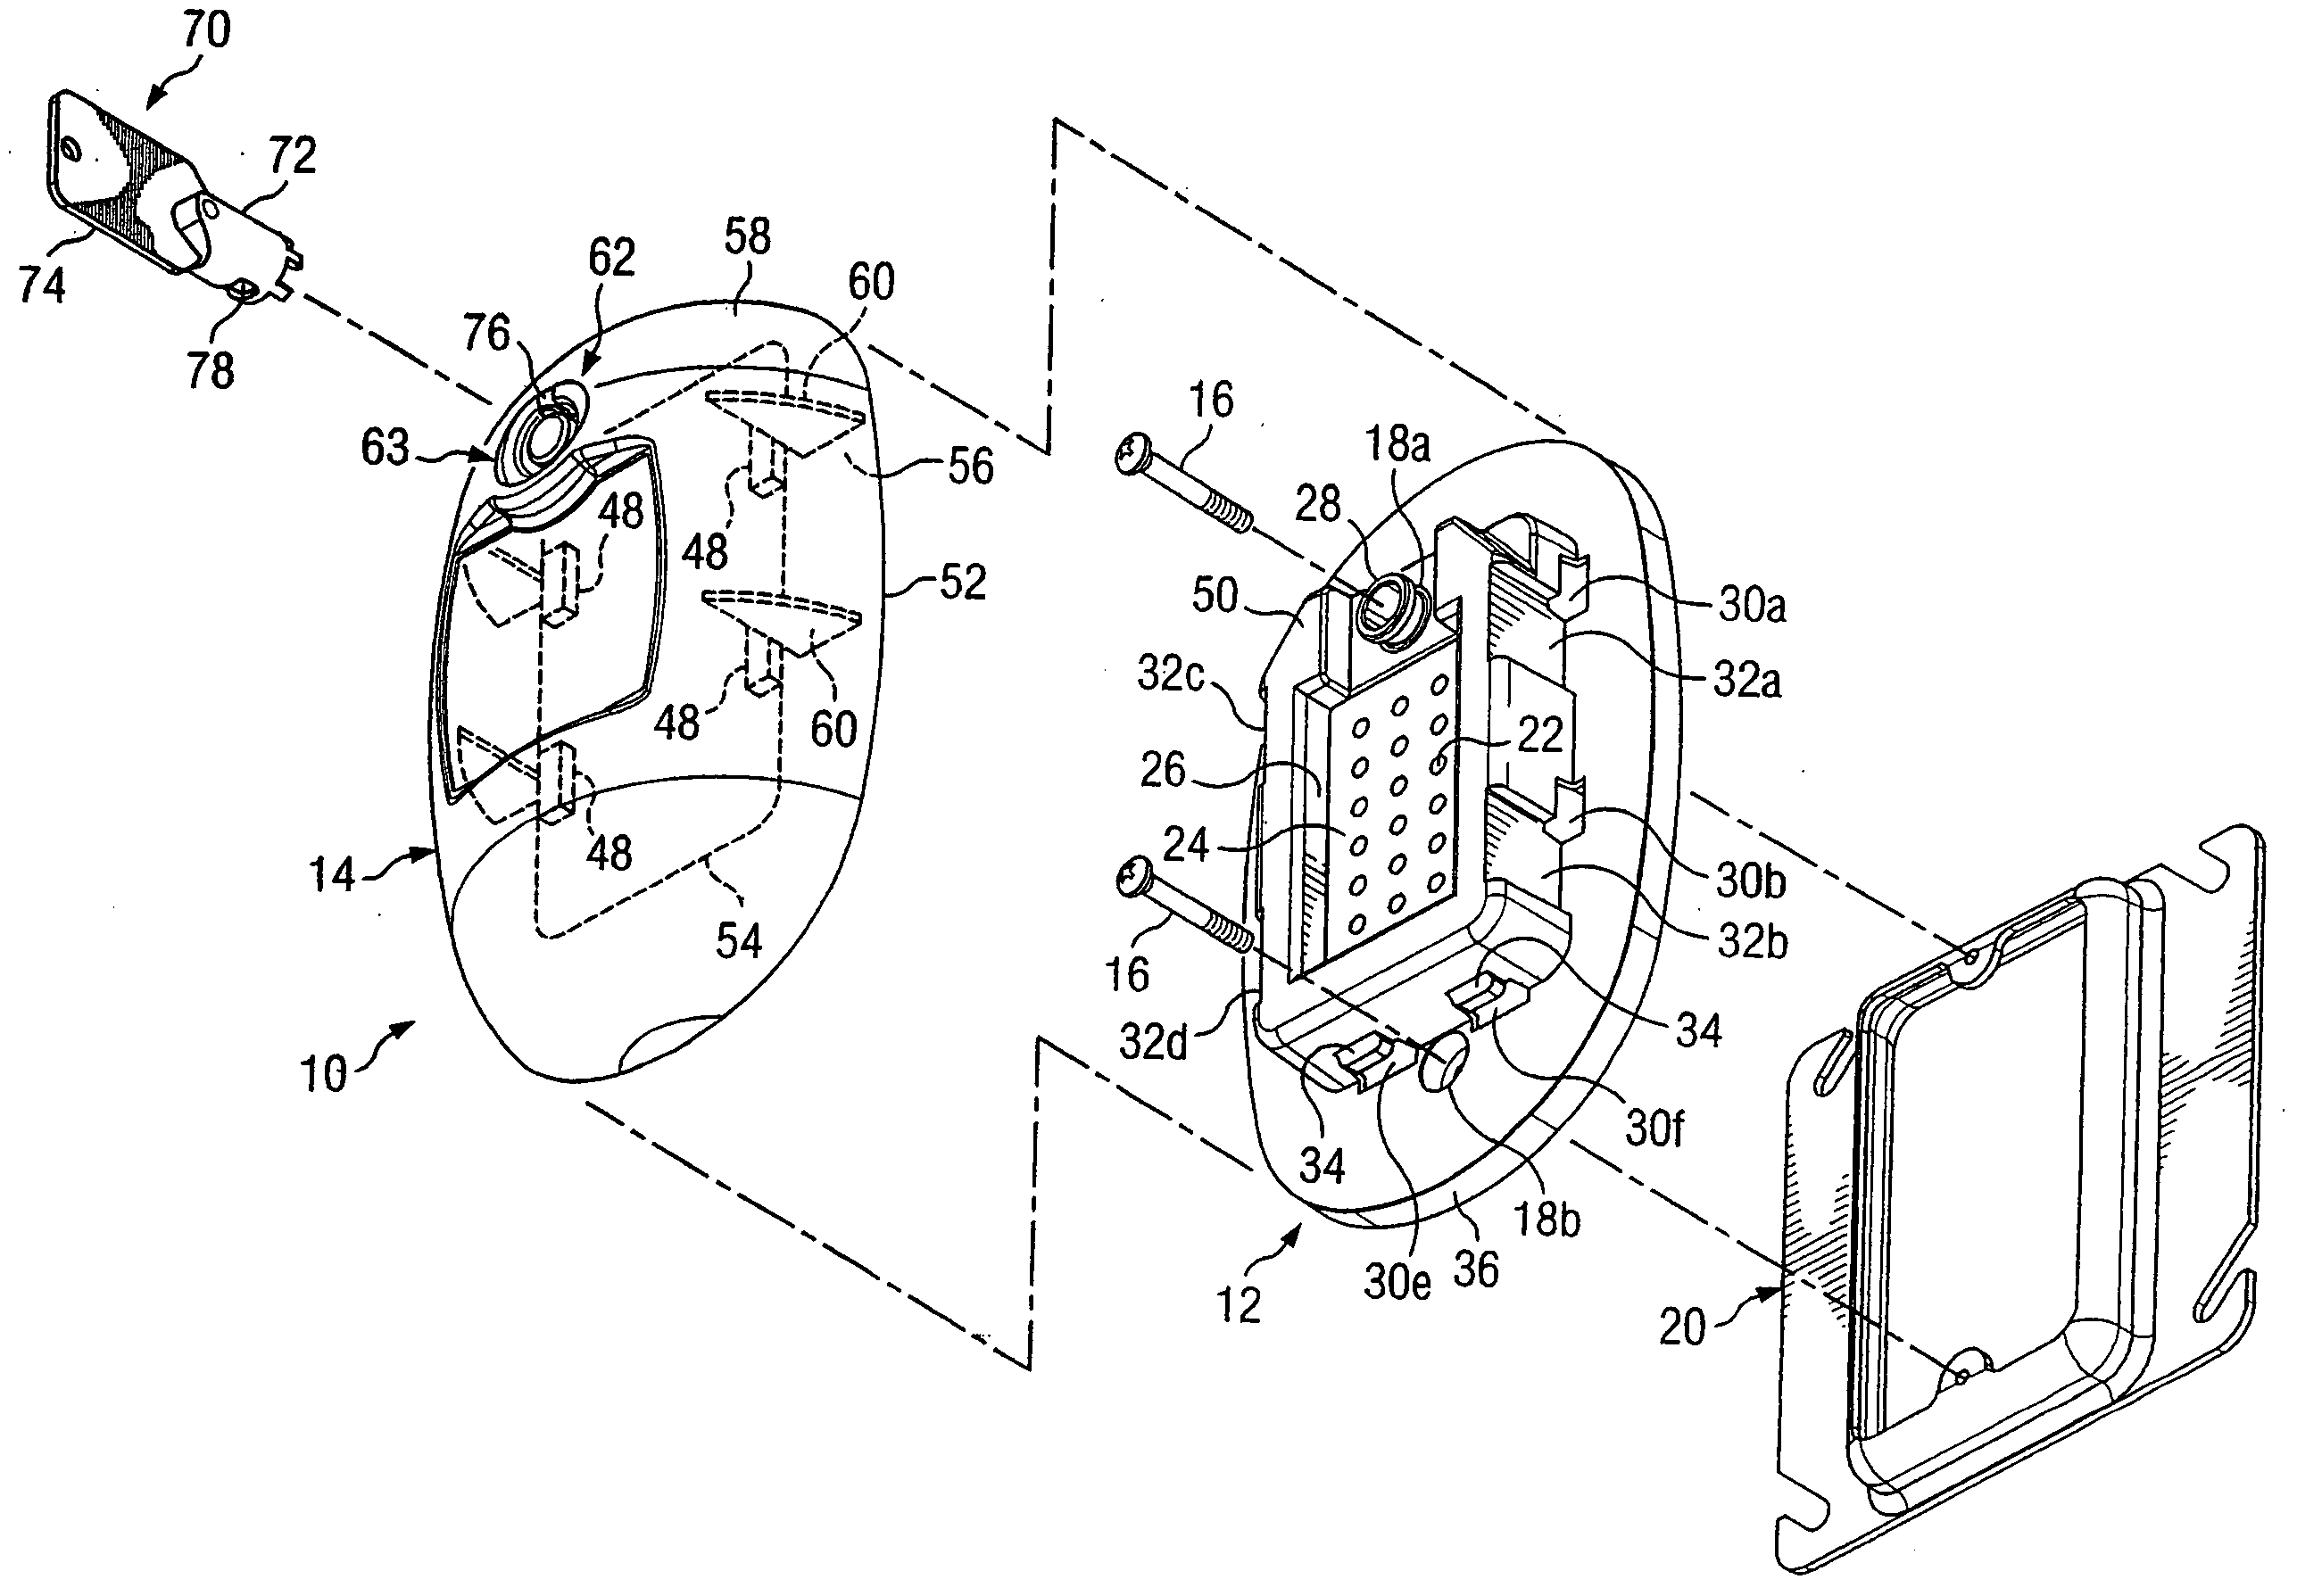 Method for protecting from unauthorized access one or more ports of a system integrated into a structure for injection of a material into one or more cavities in the structure